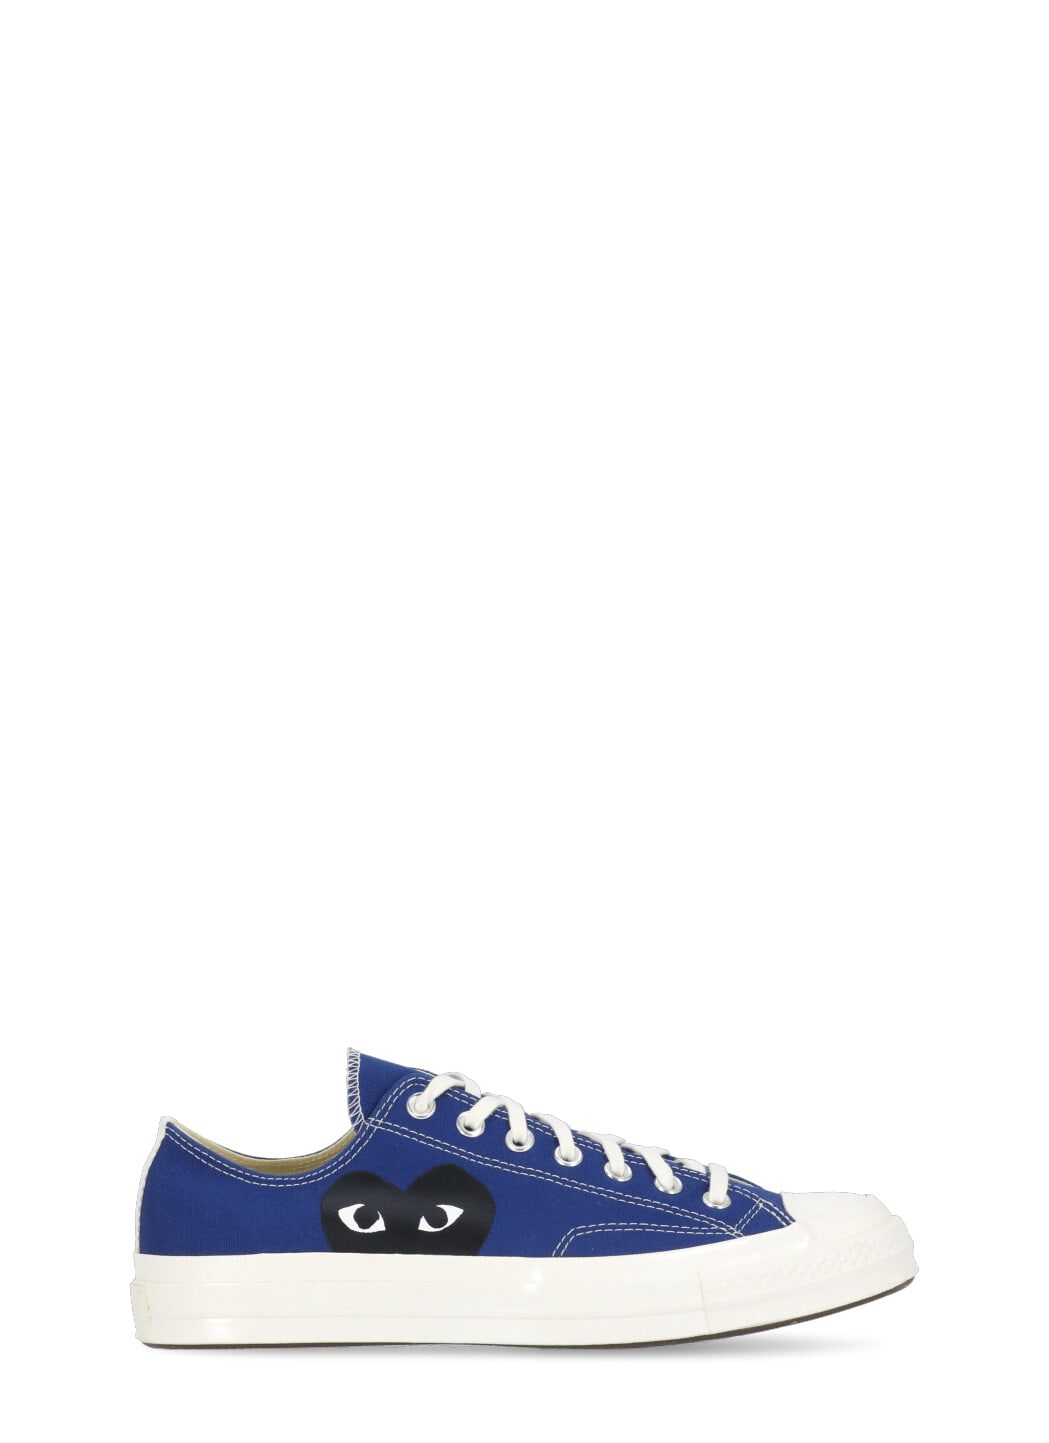 Comme Des Garçons Play Chuck Taylor Sneakers In Blue